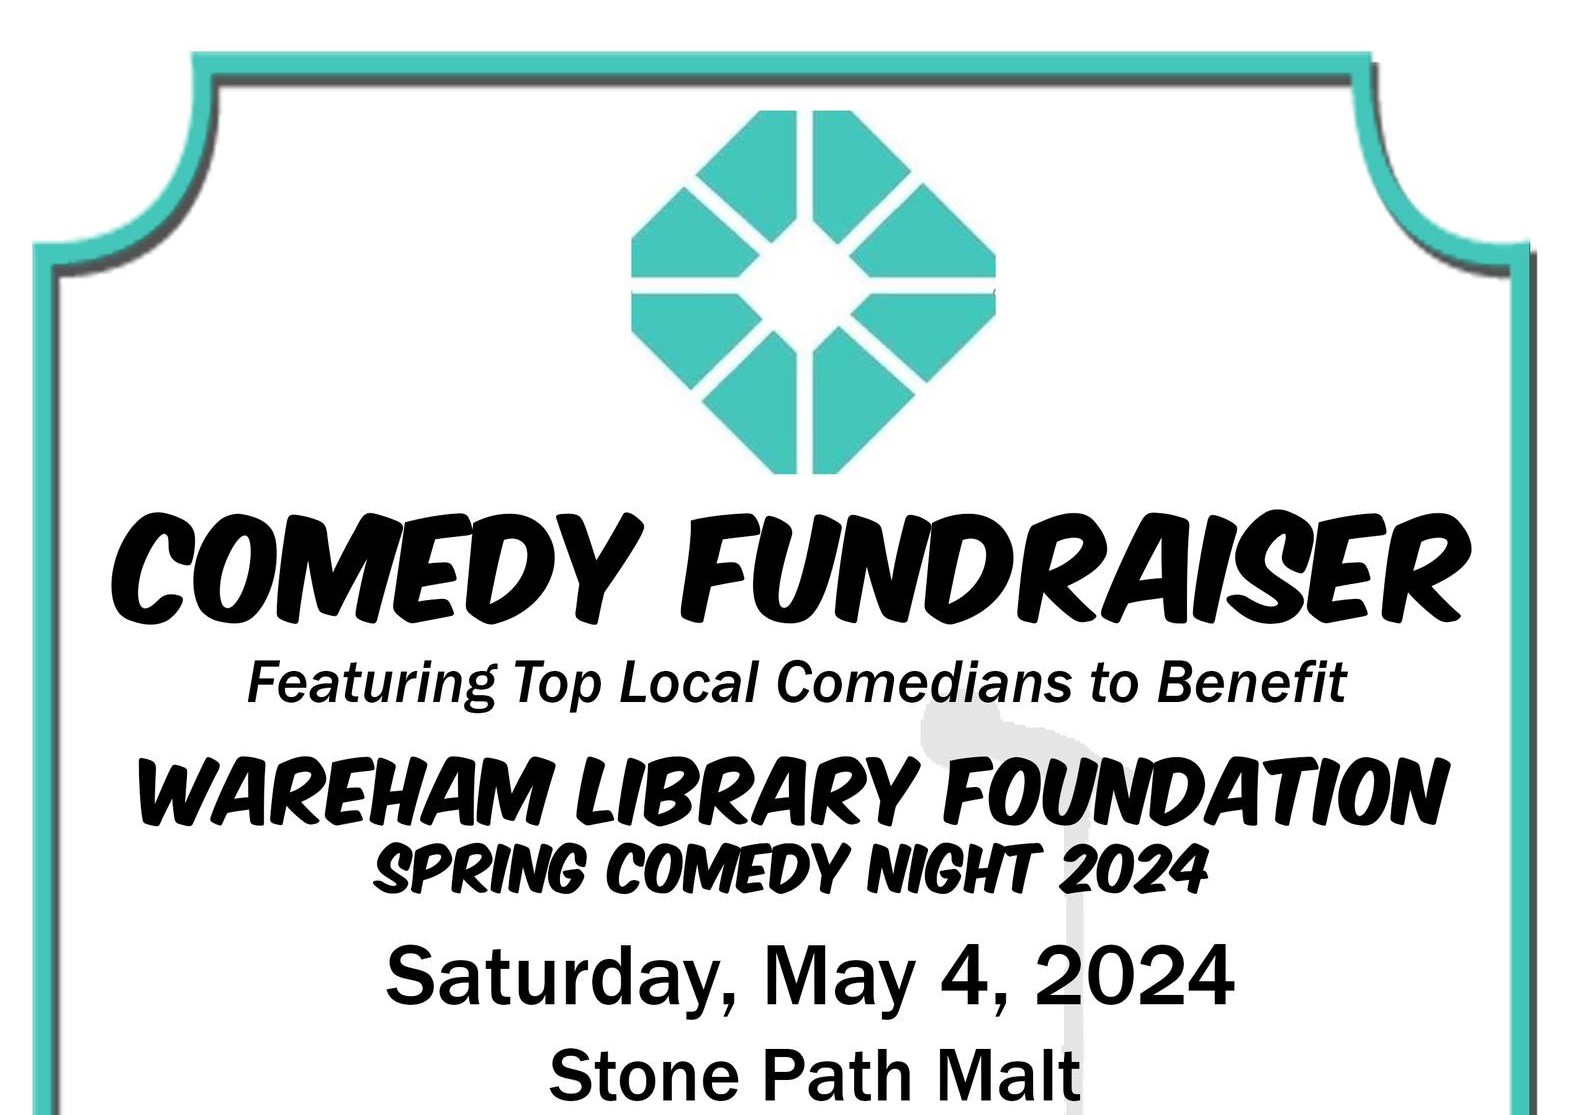 Comedy fundraiser poster